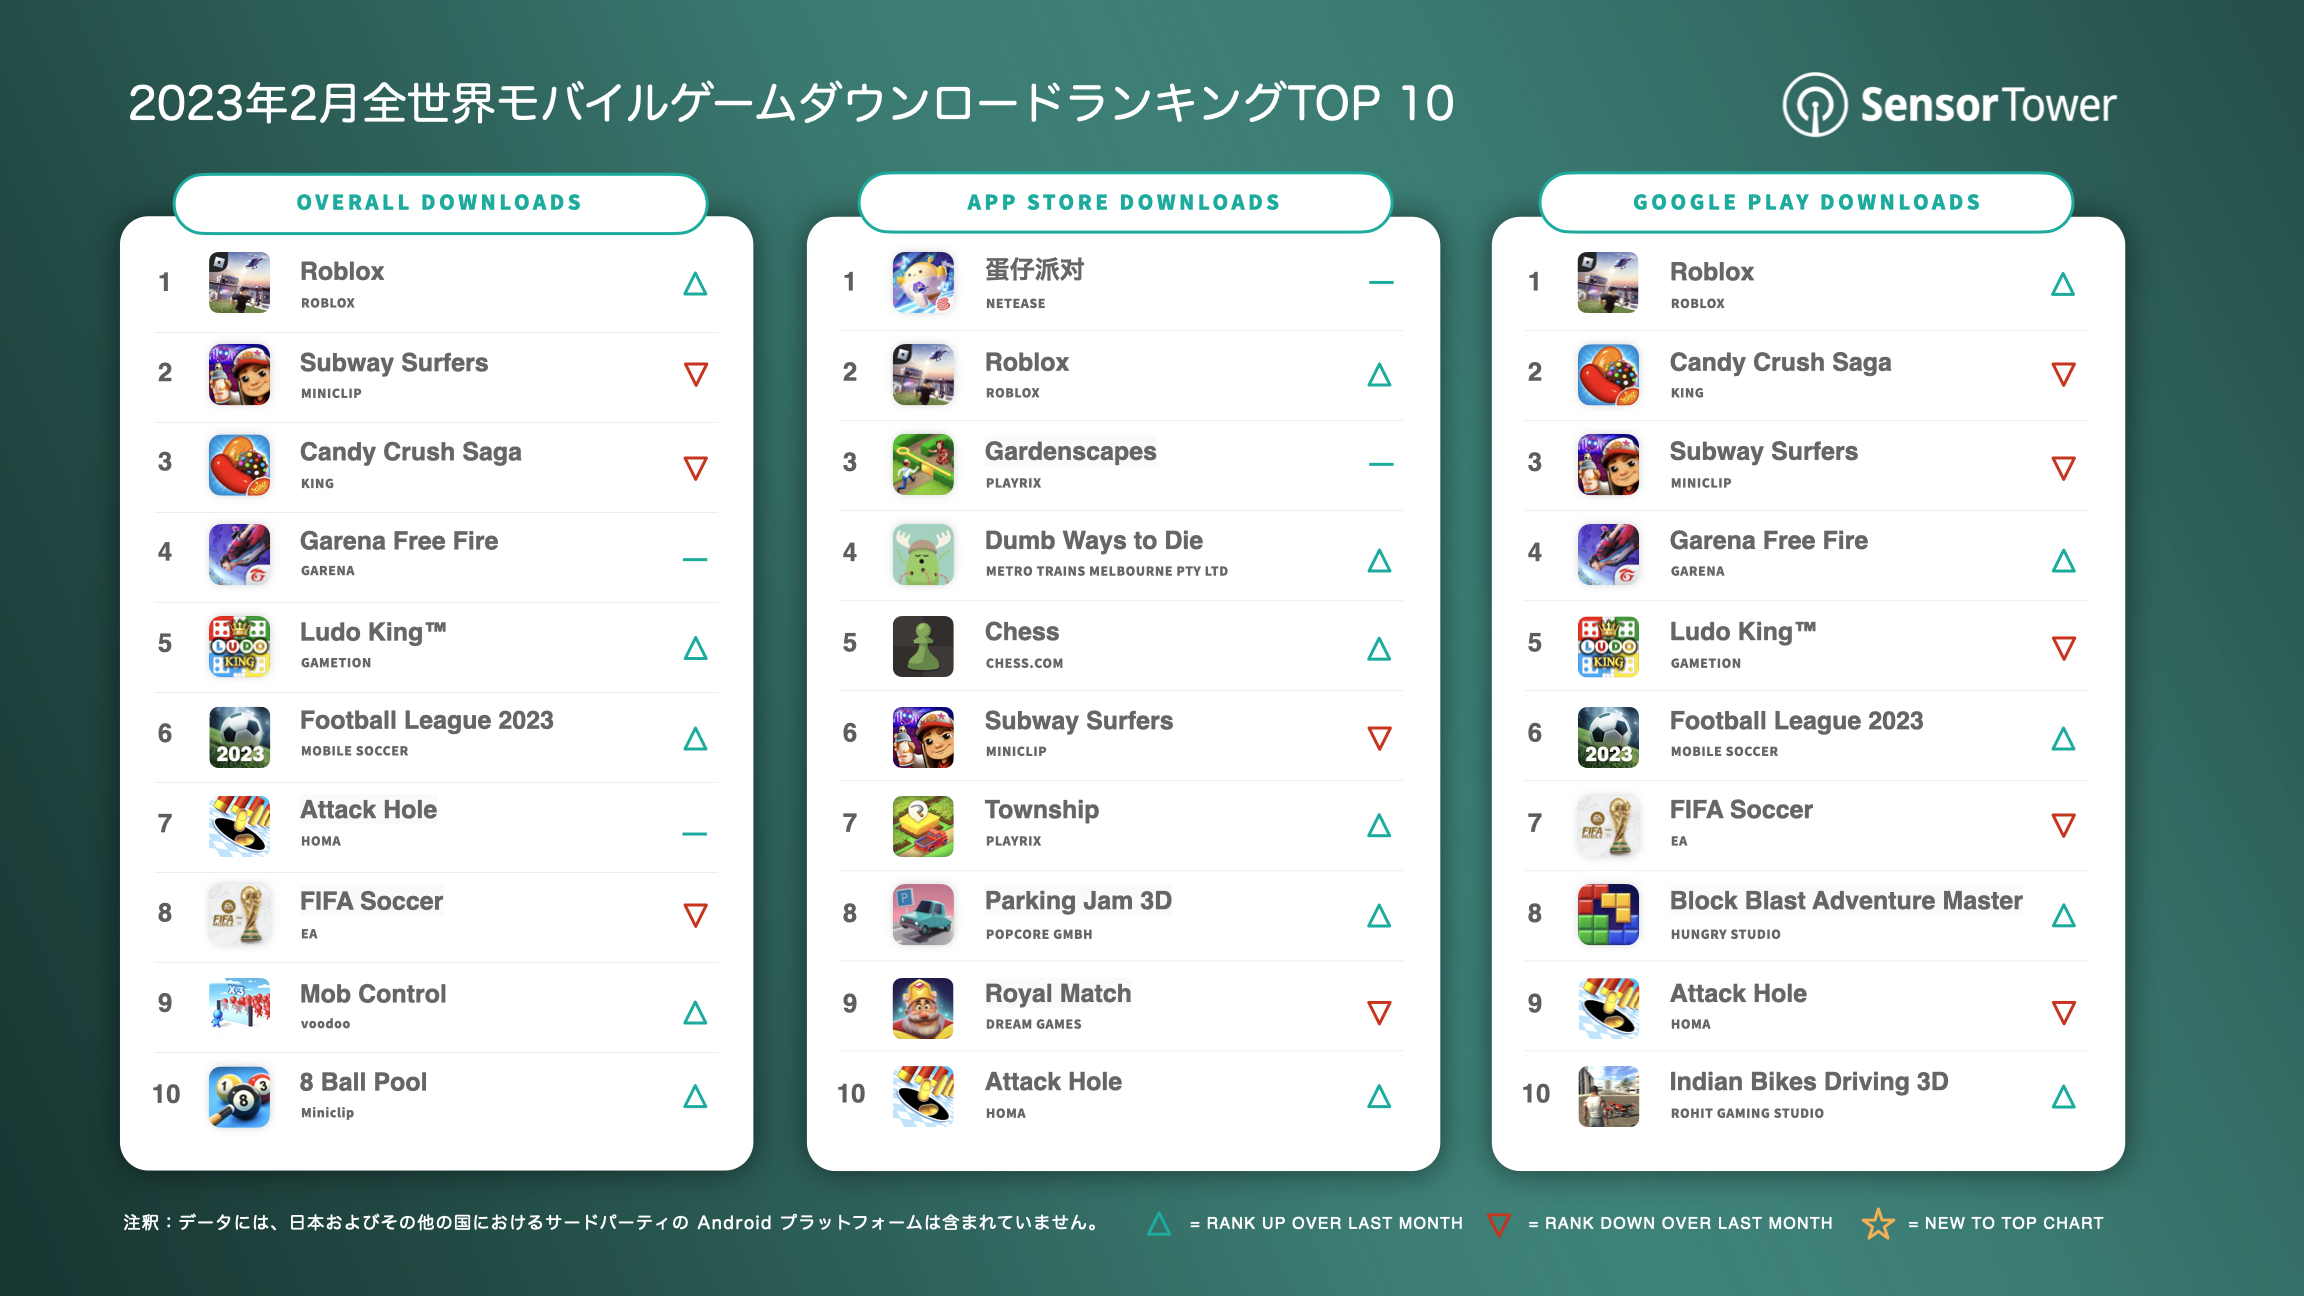 -JP- Top Mobile Games Worldwide for February 2023 by Downloads